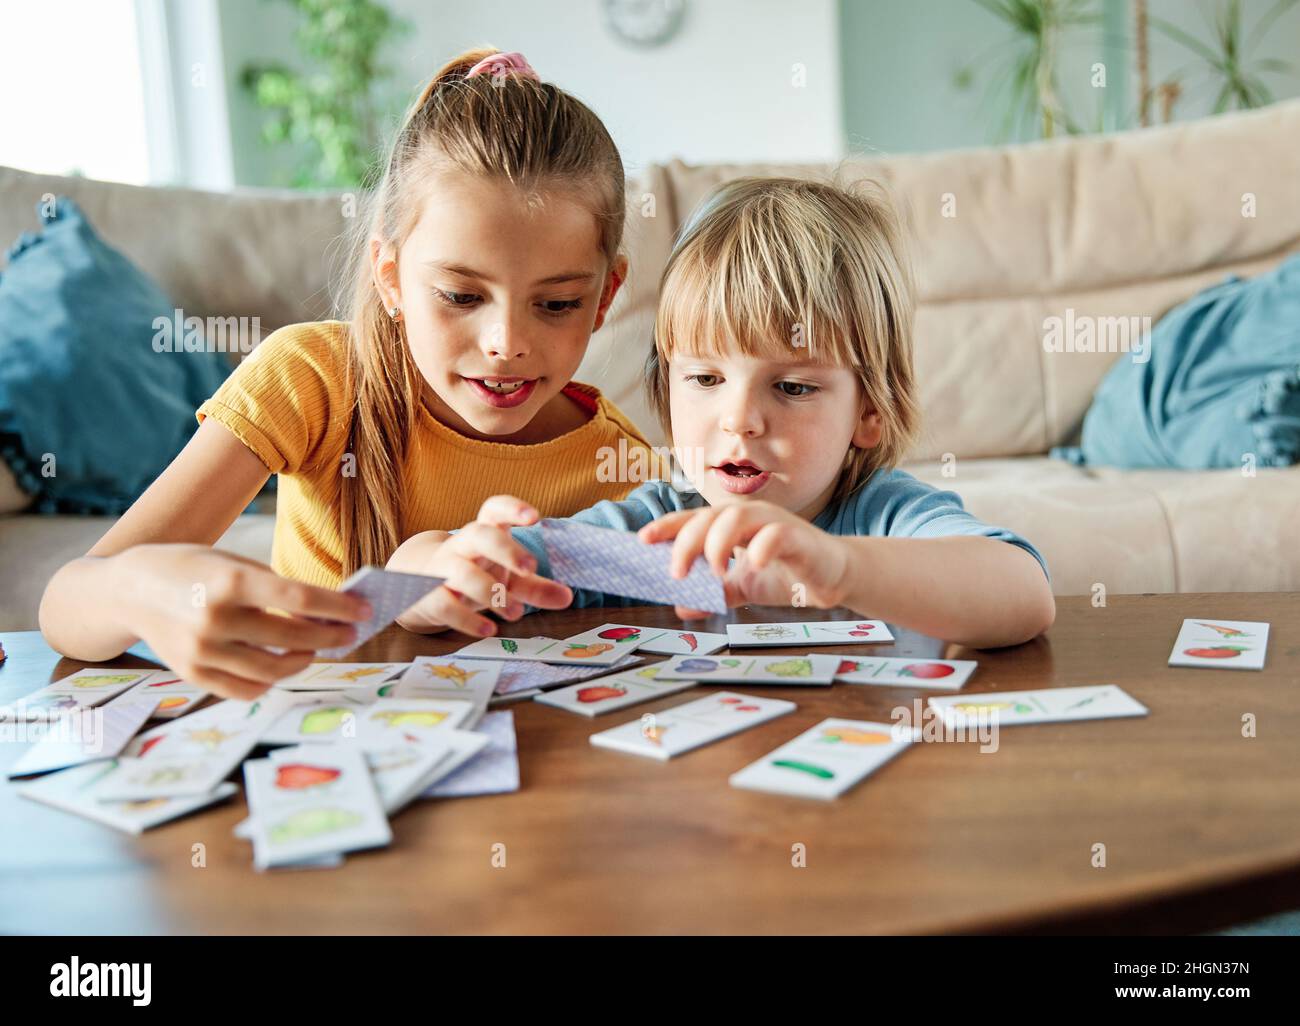 child girl boy childhood kid brother sister love family together fun happy joy happiness cute play playing board game card Stock Photo